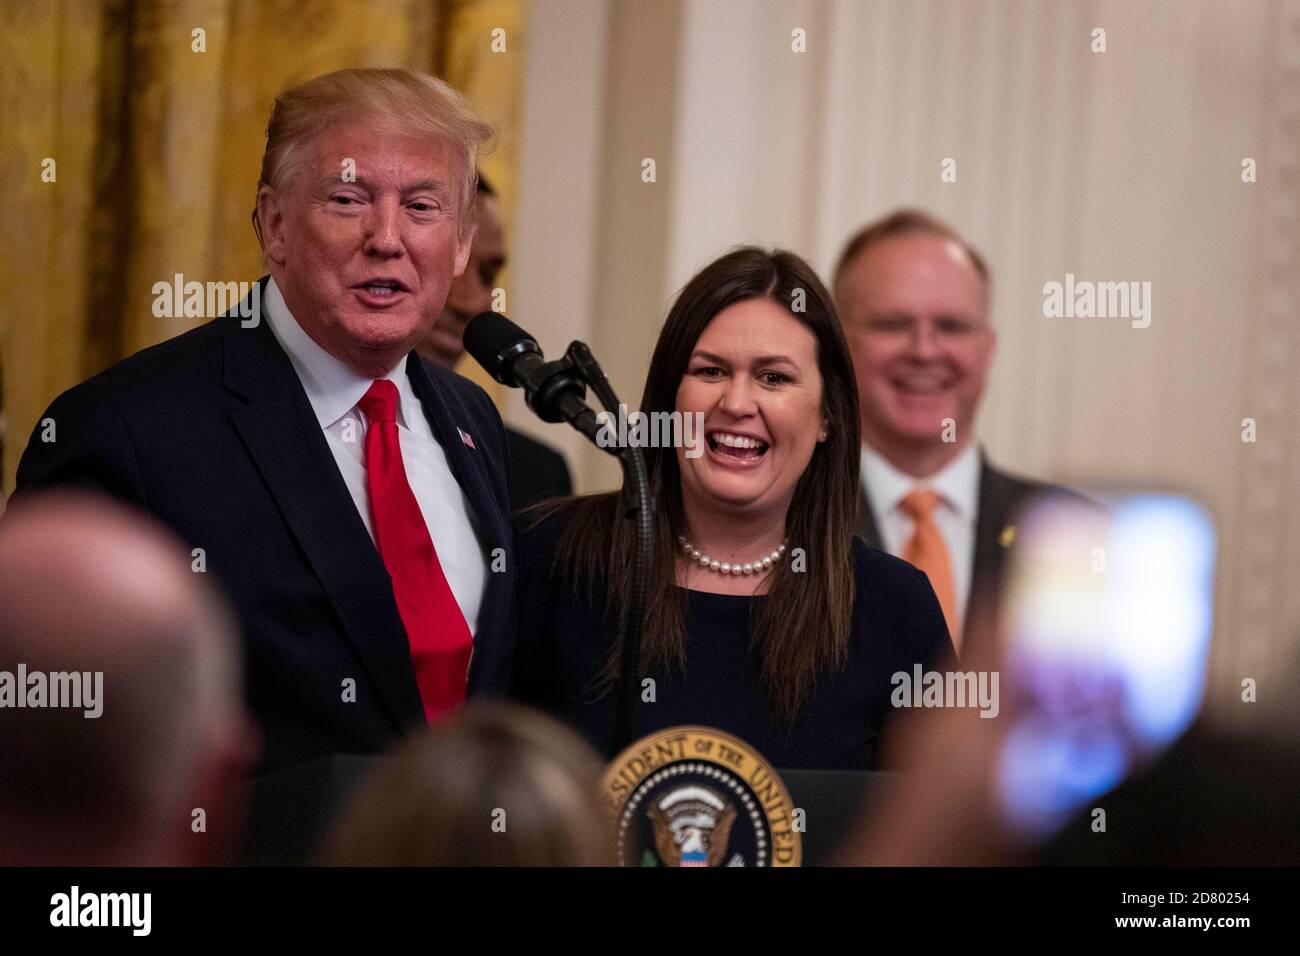 U.S. President Donald Trump speaks as he embraces outgoing White House Press Secretary Sarah Huckabee Sanders as delivers remarks about prison reform in the East Room of the White House in Washington, D.C. on June 13, 2019. Sanders announced today that she will be leaving the White House at the end of the month. Credit: Alex Edelman/The Photo Access Stock Photo